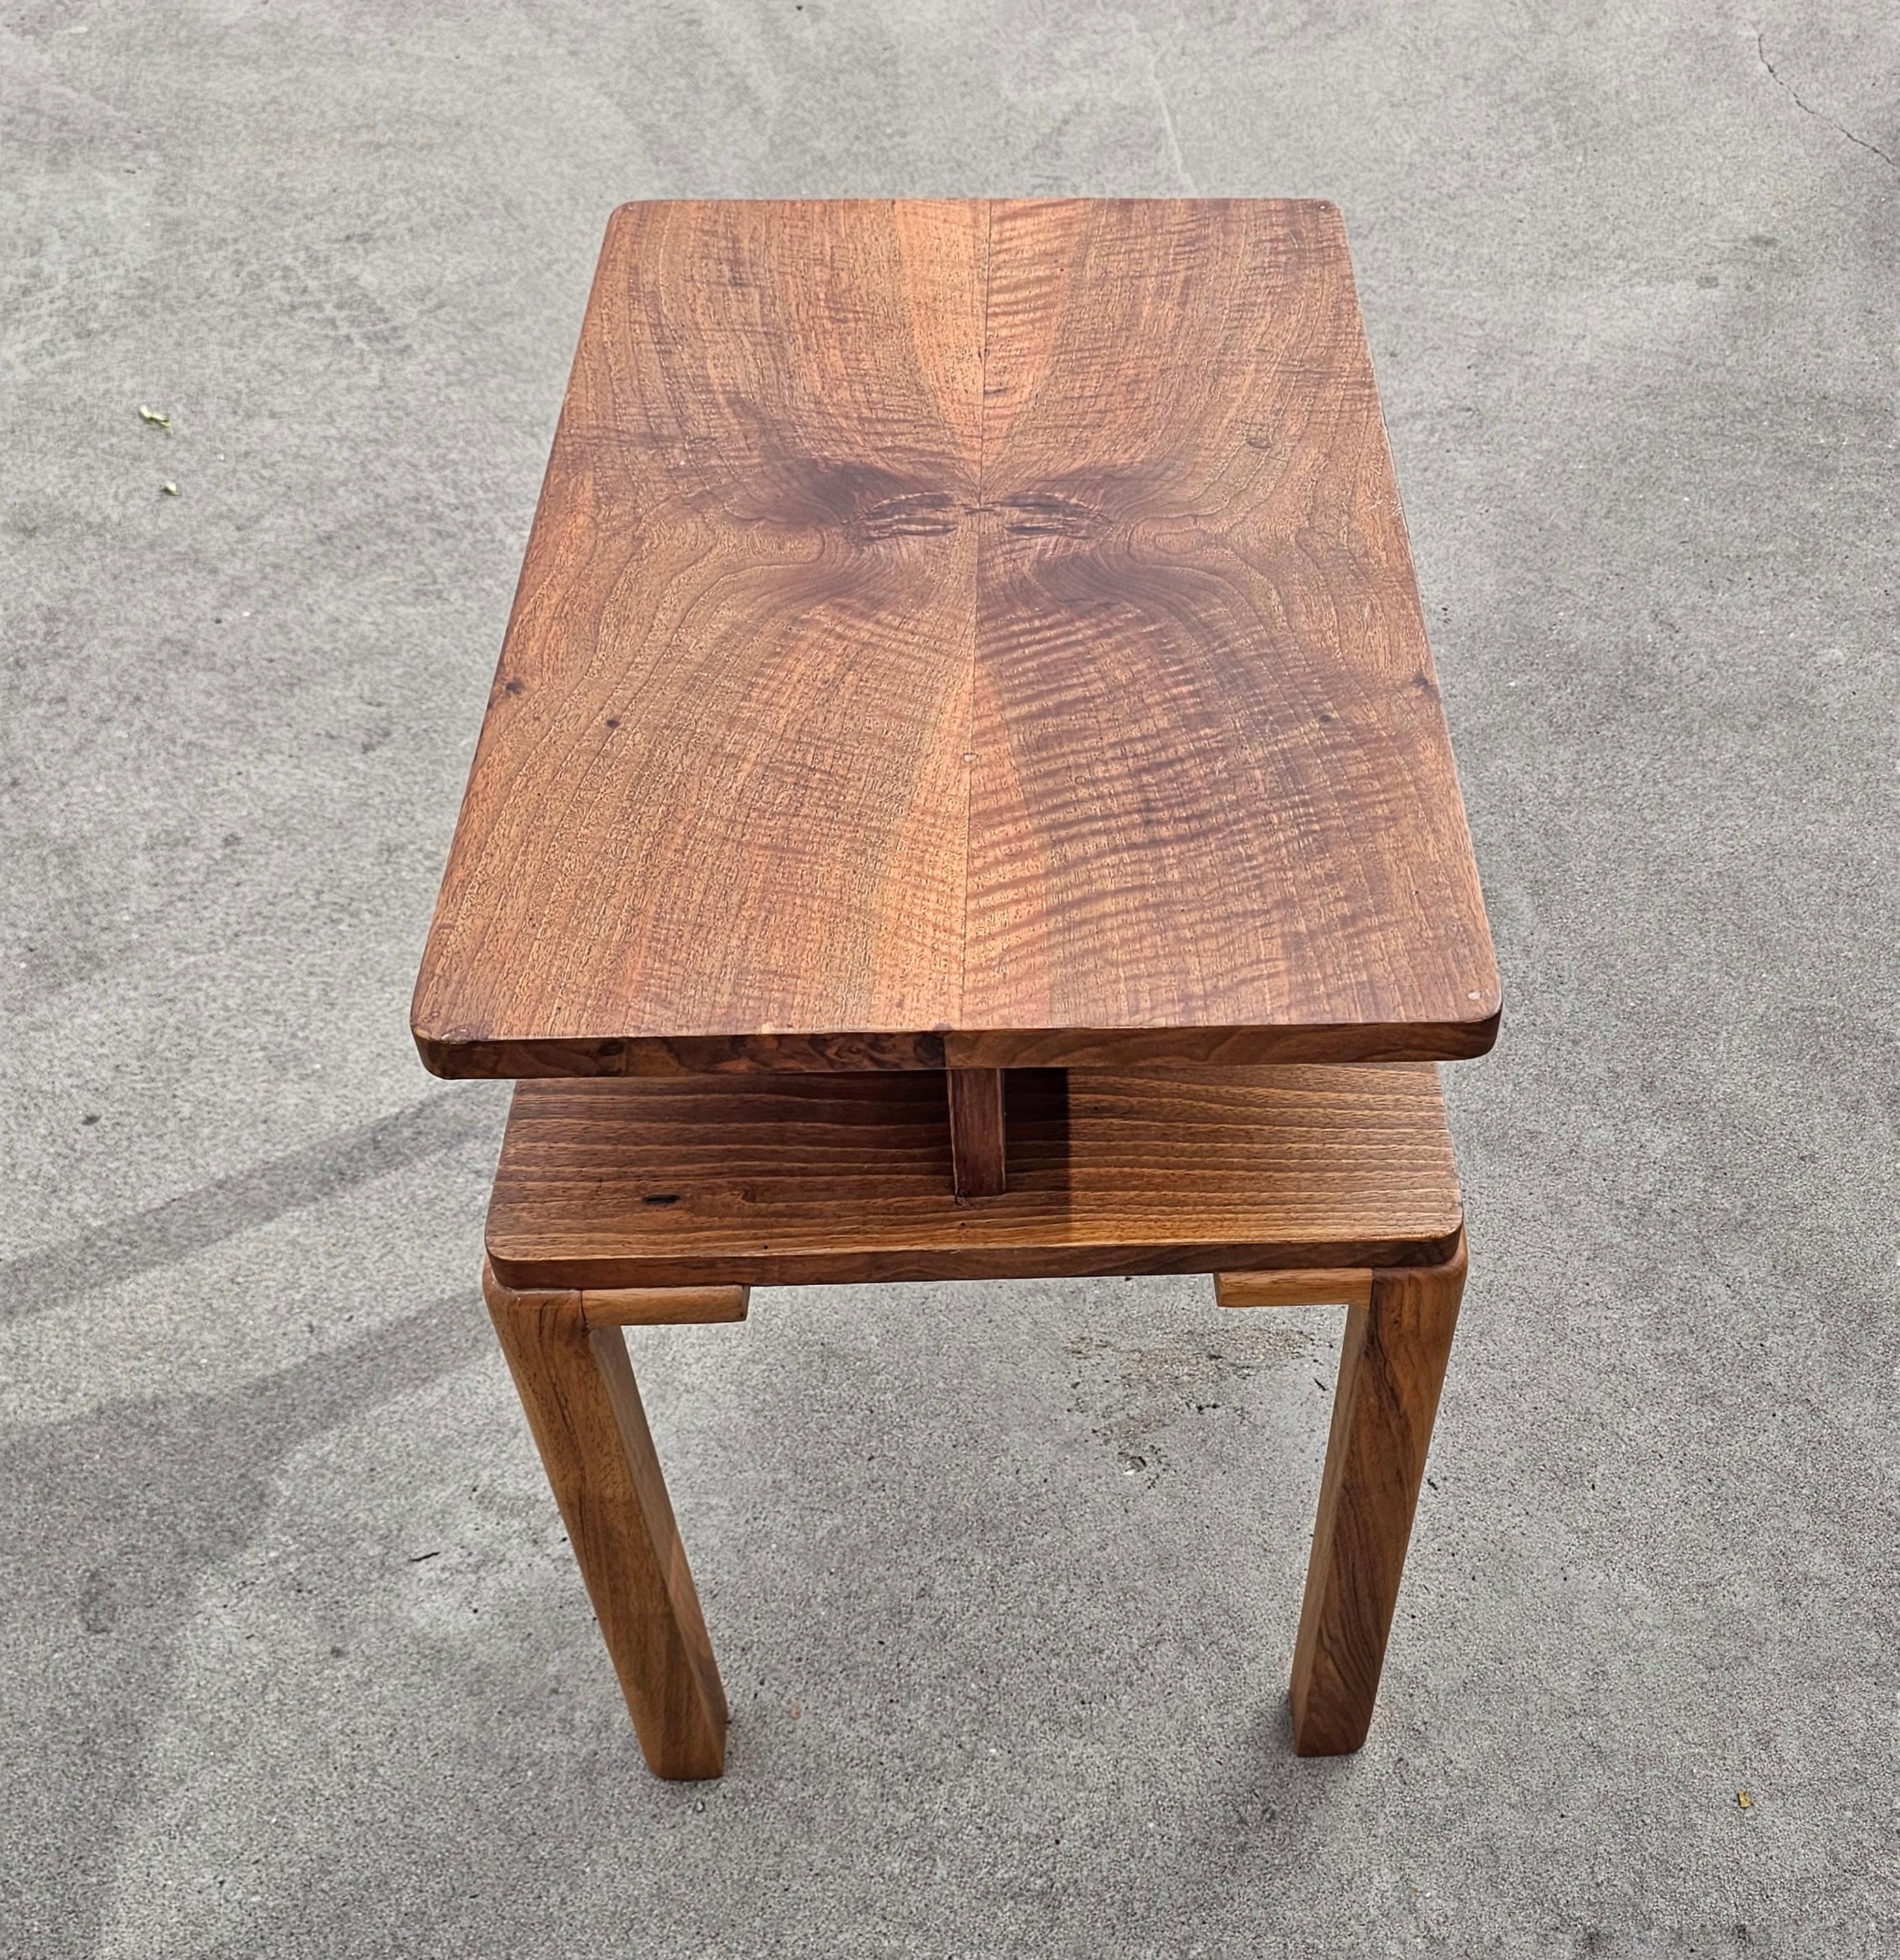 Rectangular Two Tiered Art Deco Walnut Side Table, Austria 1930s In Good Condition For Sale In Beograd, RS